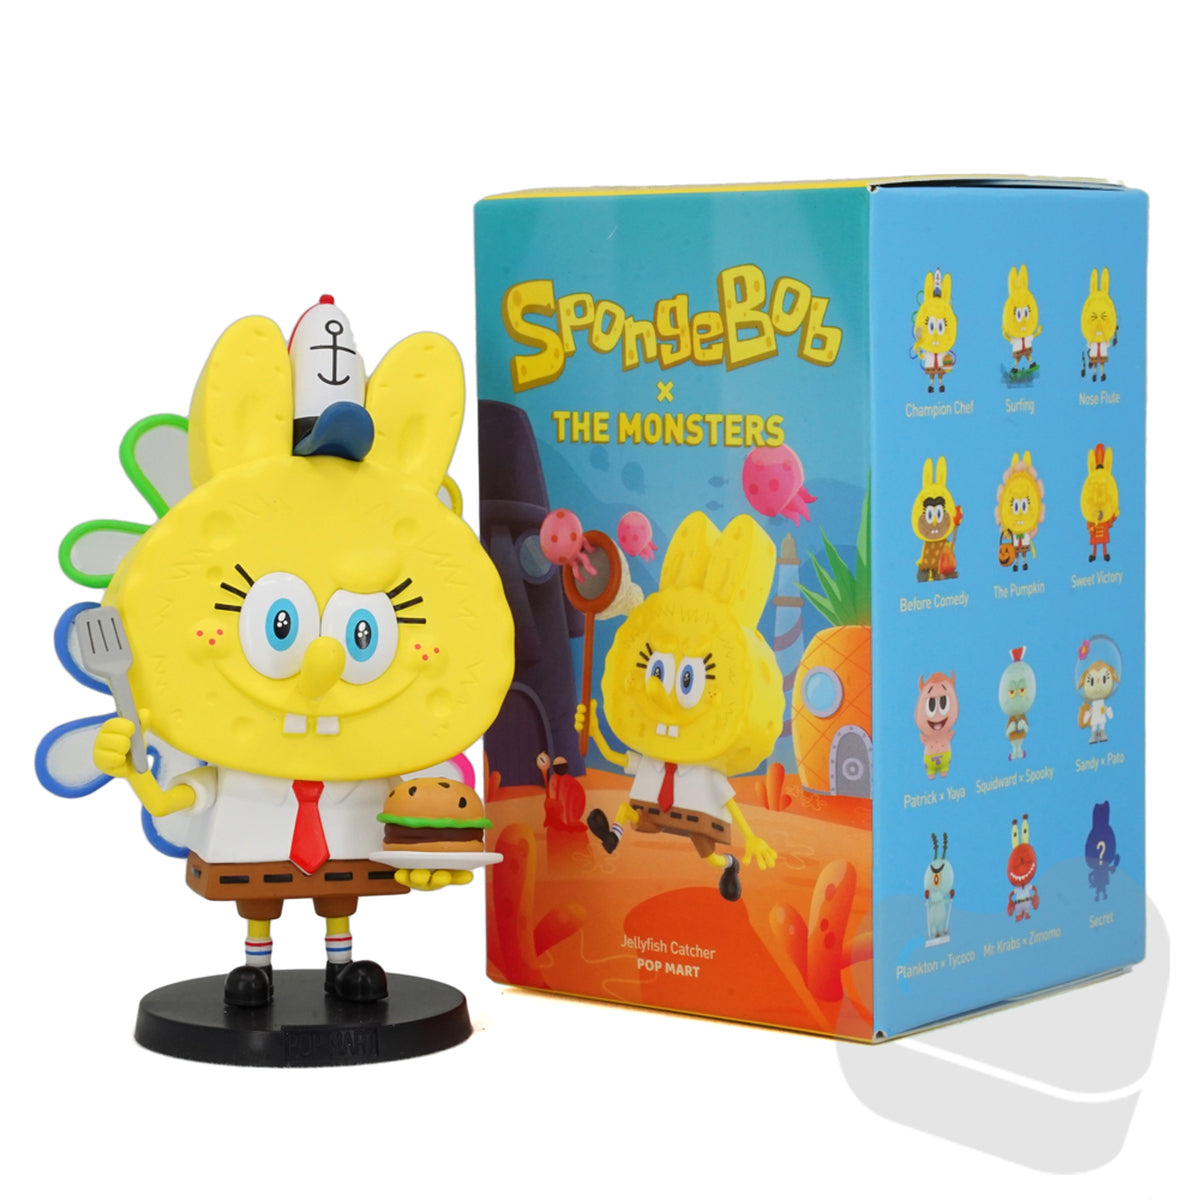 Spongebob x The Monsters Blind Box by Kasing Lung x POP Mart — Martian Toys